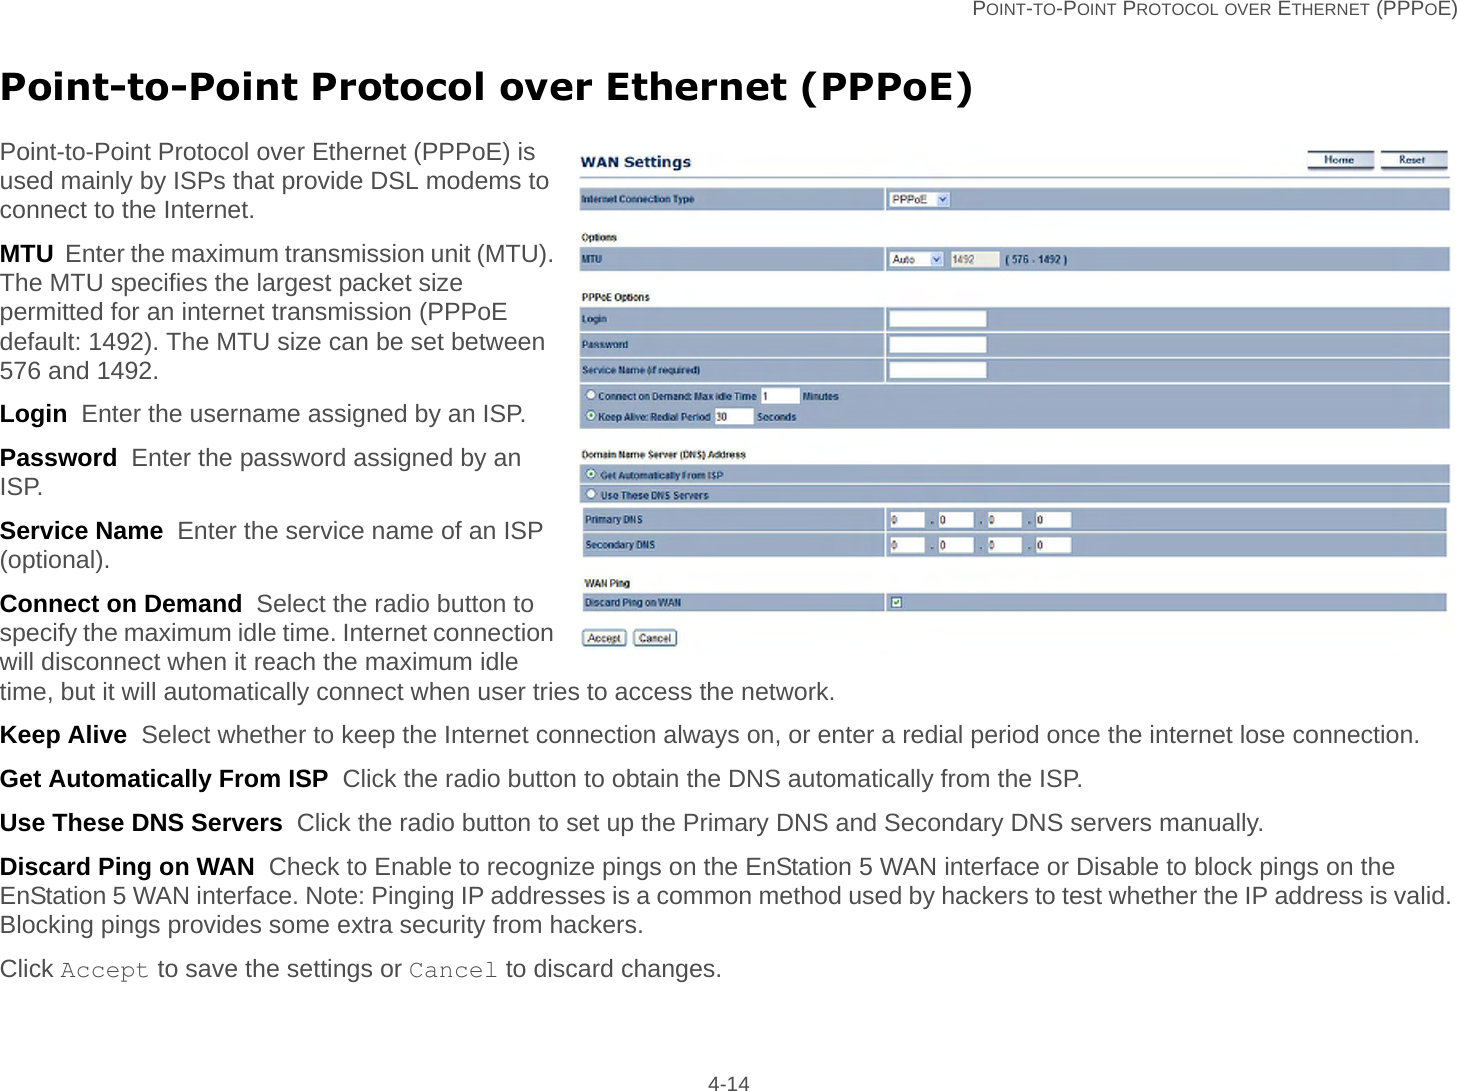   POINT-TO-POINT PROTOCOL OVER ETHERNET (PPPOE) 4-14Point-to-Point Protocol over Ethernet (PPPoE)Point-to-Point Protocol over Ethernet (PPPoE) is used mainly by ISPs that provide DSL modems to connect to the Internet.MTU  Enter the maximum transmission unit (MTU). The MTU specifies the largest packet size permitted for an internet transmission (PPPoE default: 1492). The MTU size can be set between 576 and 1492.Login  Enter the username assigned by an ISP.Password  Enter the password assigned by an ISP.Service Name  Enter the service name of an ISP (optional).Connect on Demand  Select the radio button to specify the maximum idle time. Internet connection will disconnect when it reach the maximum idle time, but it will automatically connect when user tries to access the network.Keep Alive  Select whether to keep the Internet connection always on, or enter a redial period once the internet lose connection.Get Automatically From ISP  Click the radio button to obtain the DNS automatically from the ISP.Use These DNS Servers  Click the radio button to set up the Primary DNS and Secondary DNS servers manually.Discard Ping on WAN  Check to Enable to recognize pings on the EnStation 5 WAN interface or Disable to block pings on the EnStation 5 WAN interface. Note: Pinging IP addresses is a common method used by hackers to test whether the IP address is valid. Blocking pings provides some extra security from hackers.Click Accept to save the settings or Cancel to discard changes.